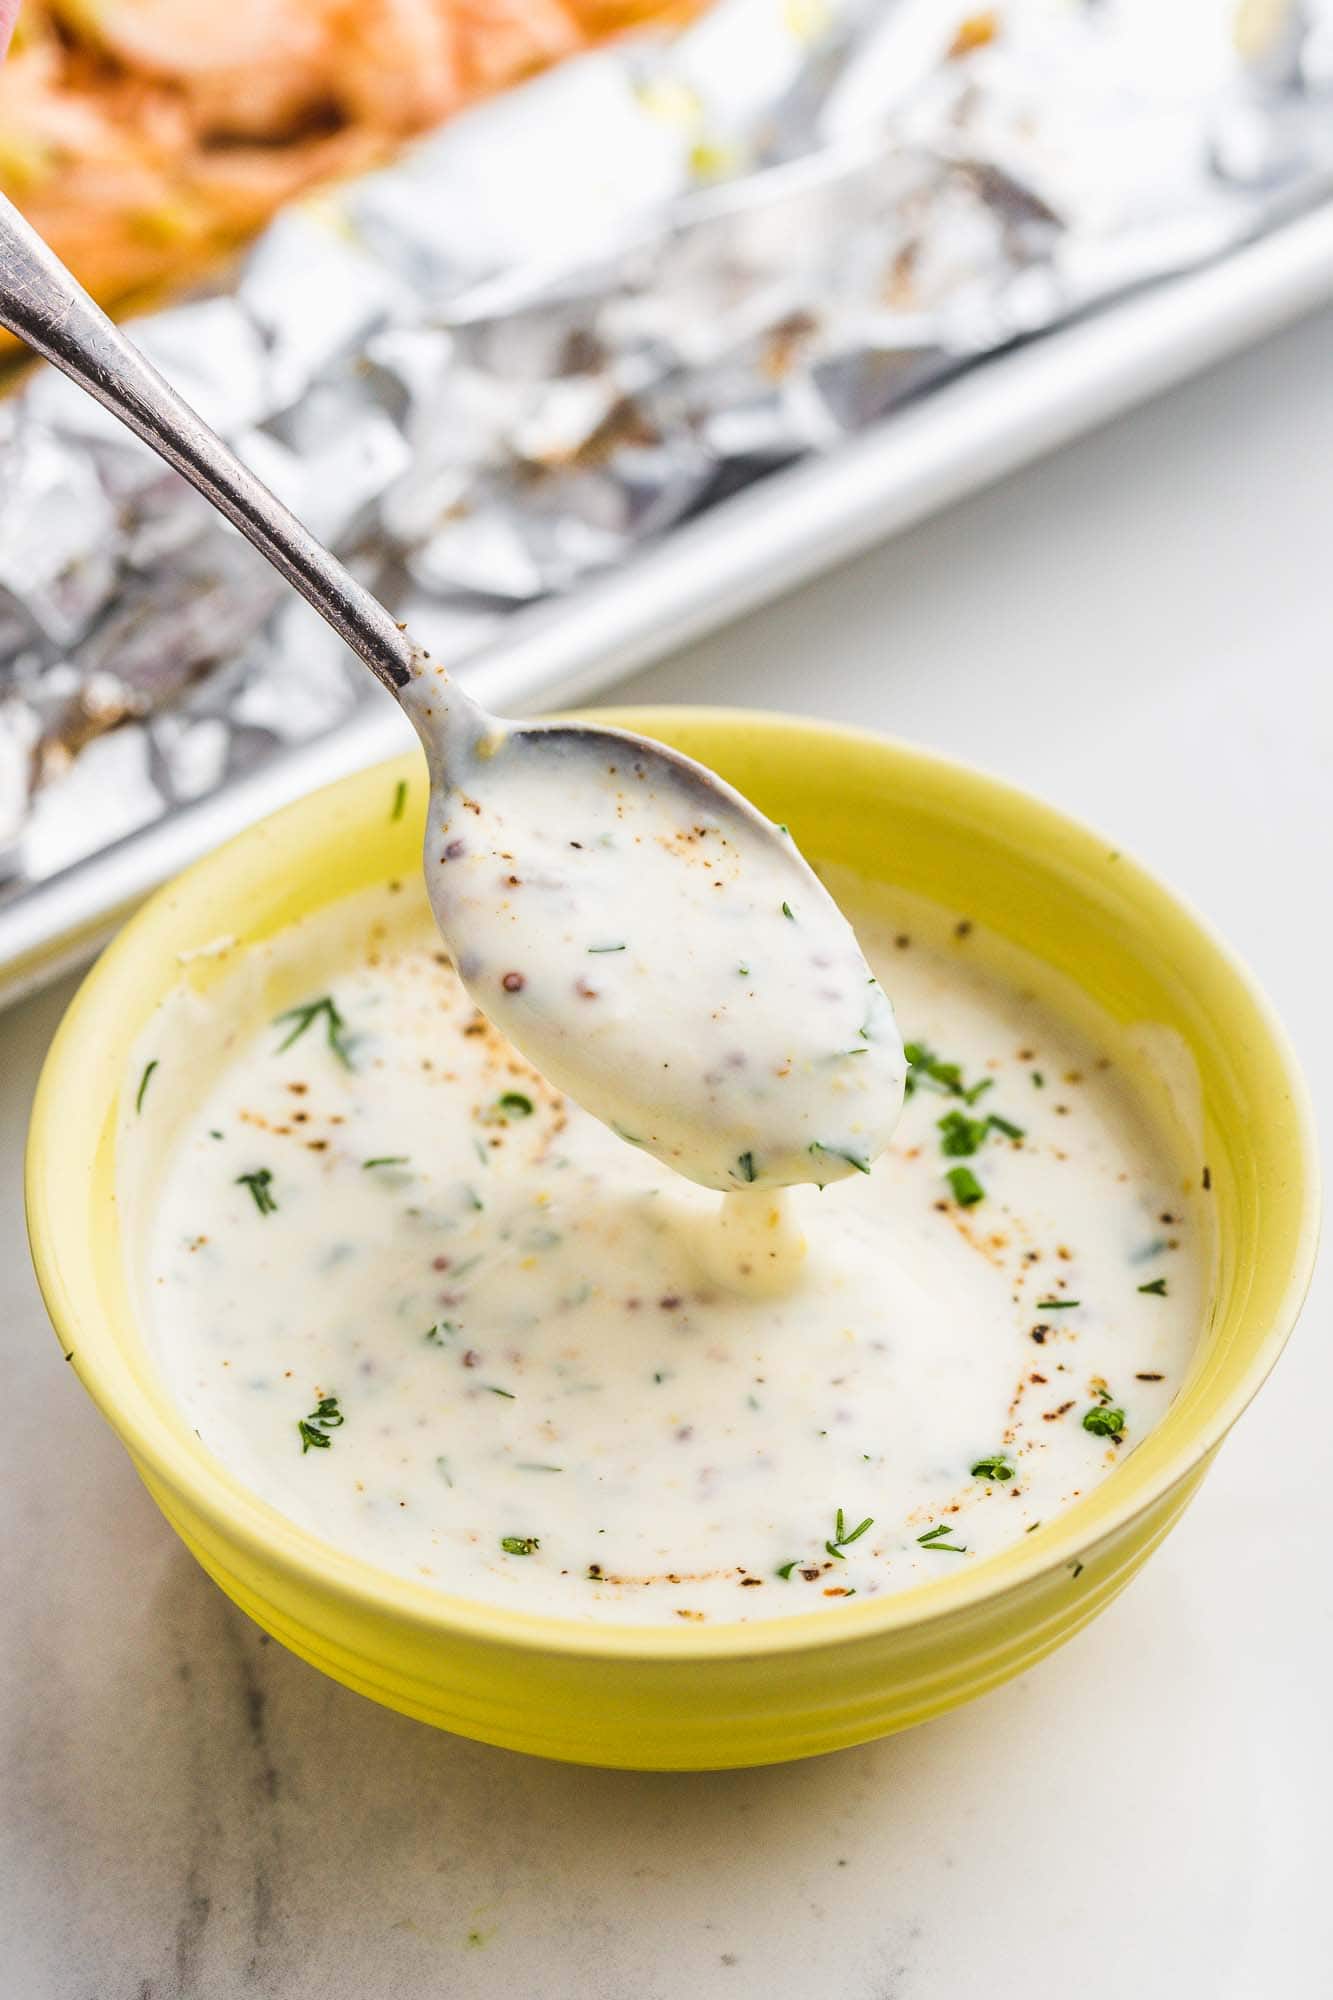 Herb cream sauce in a yellow bowl and a spoon